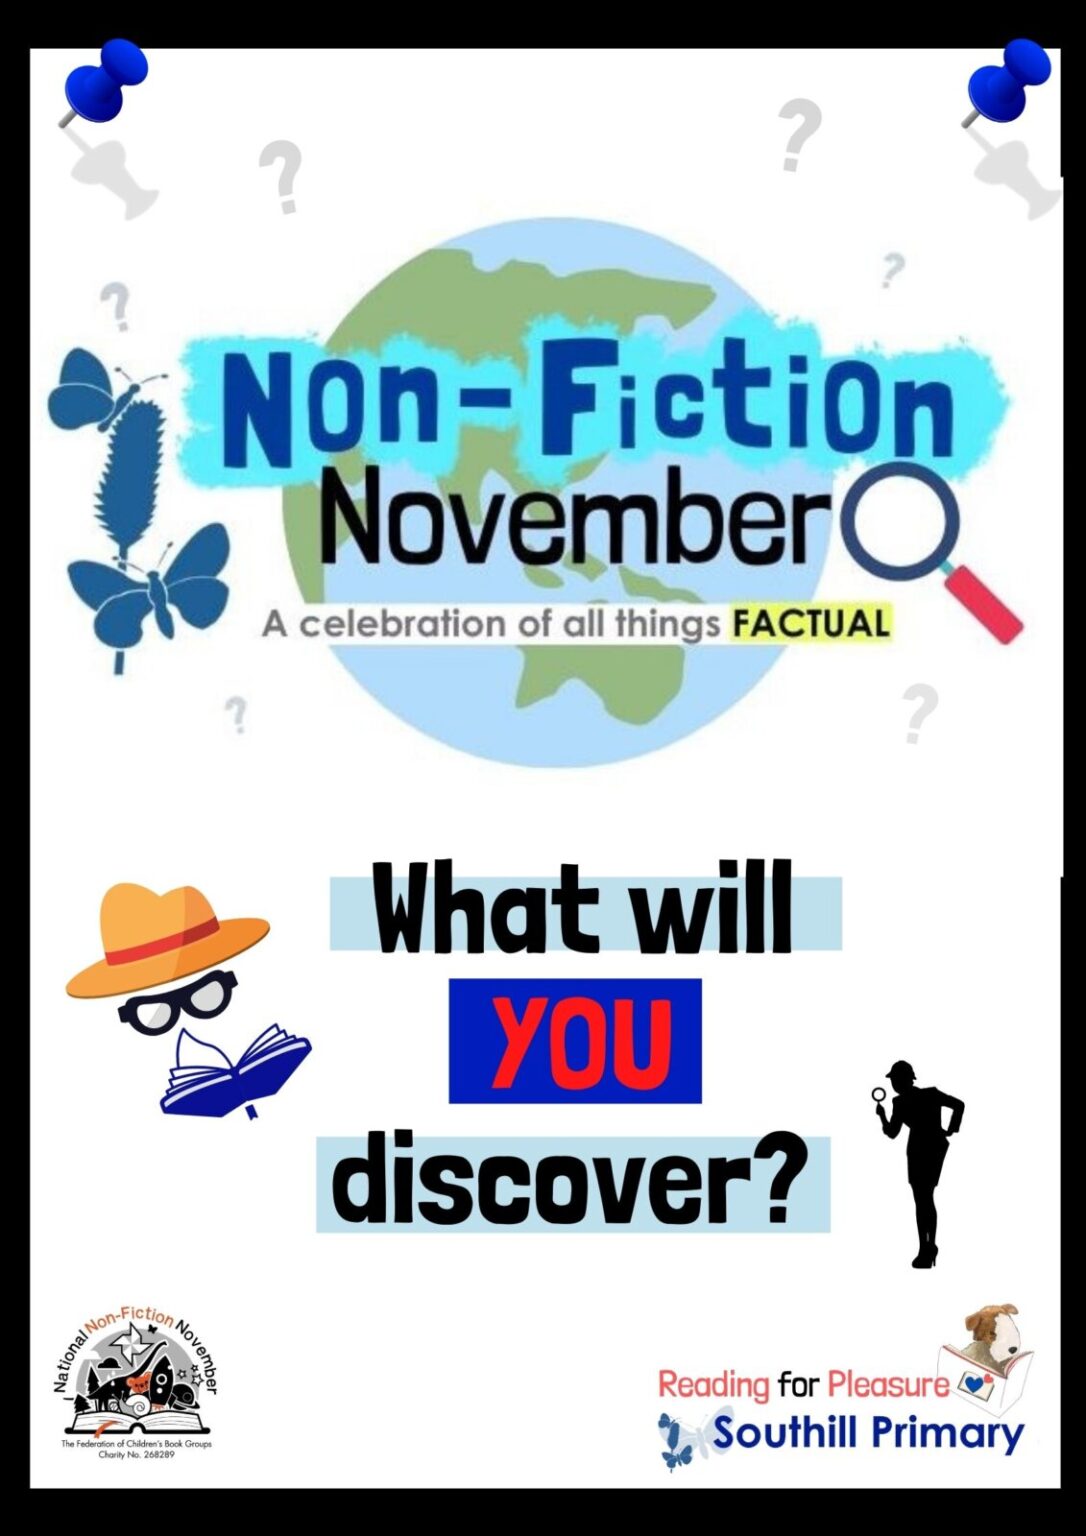 NonFiction NOVEMBER is Here! Southill Primary School